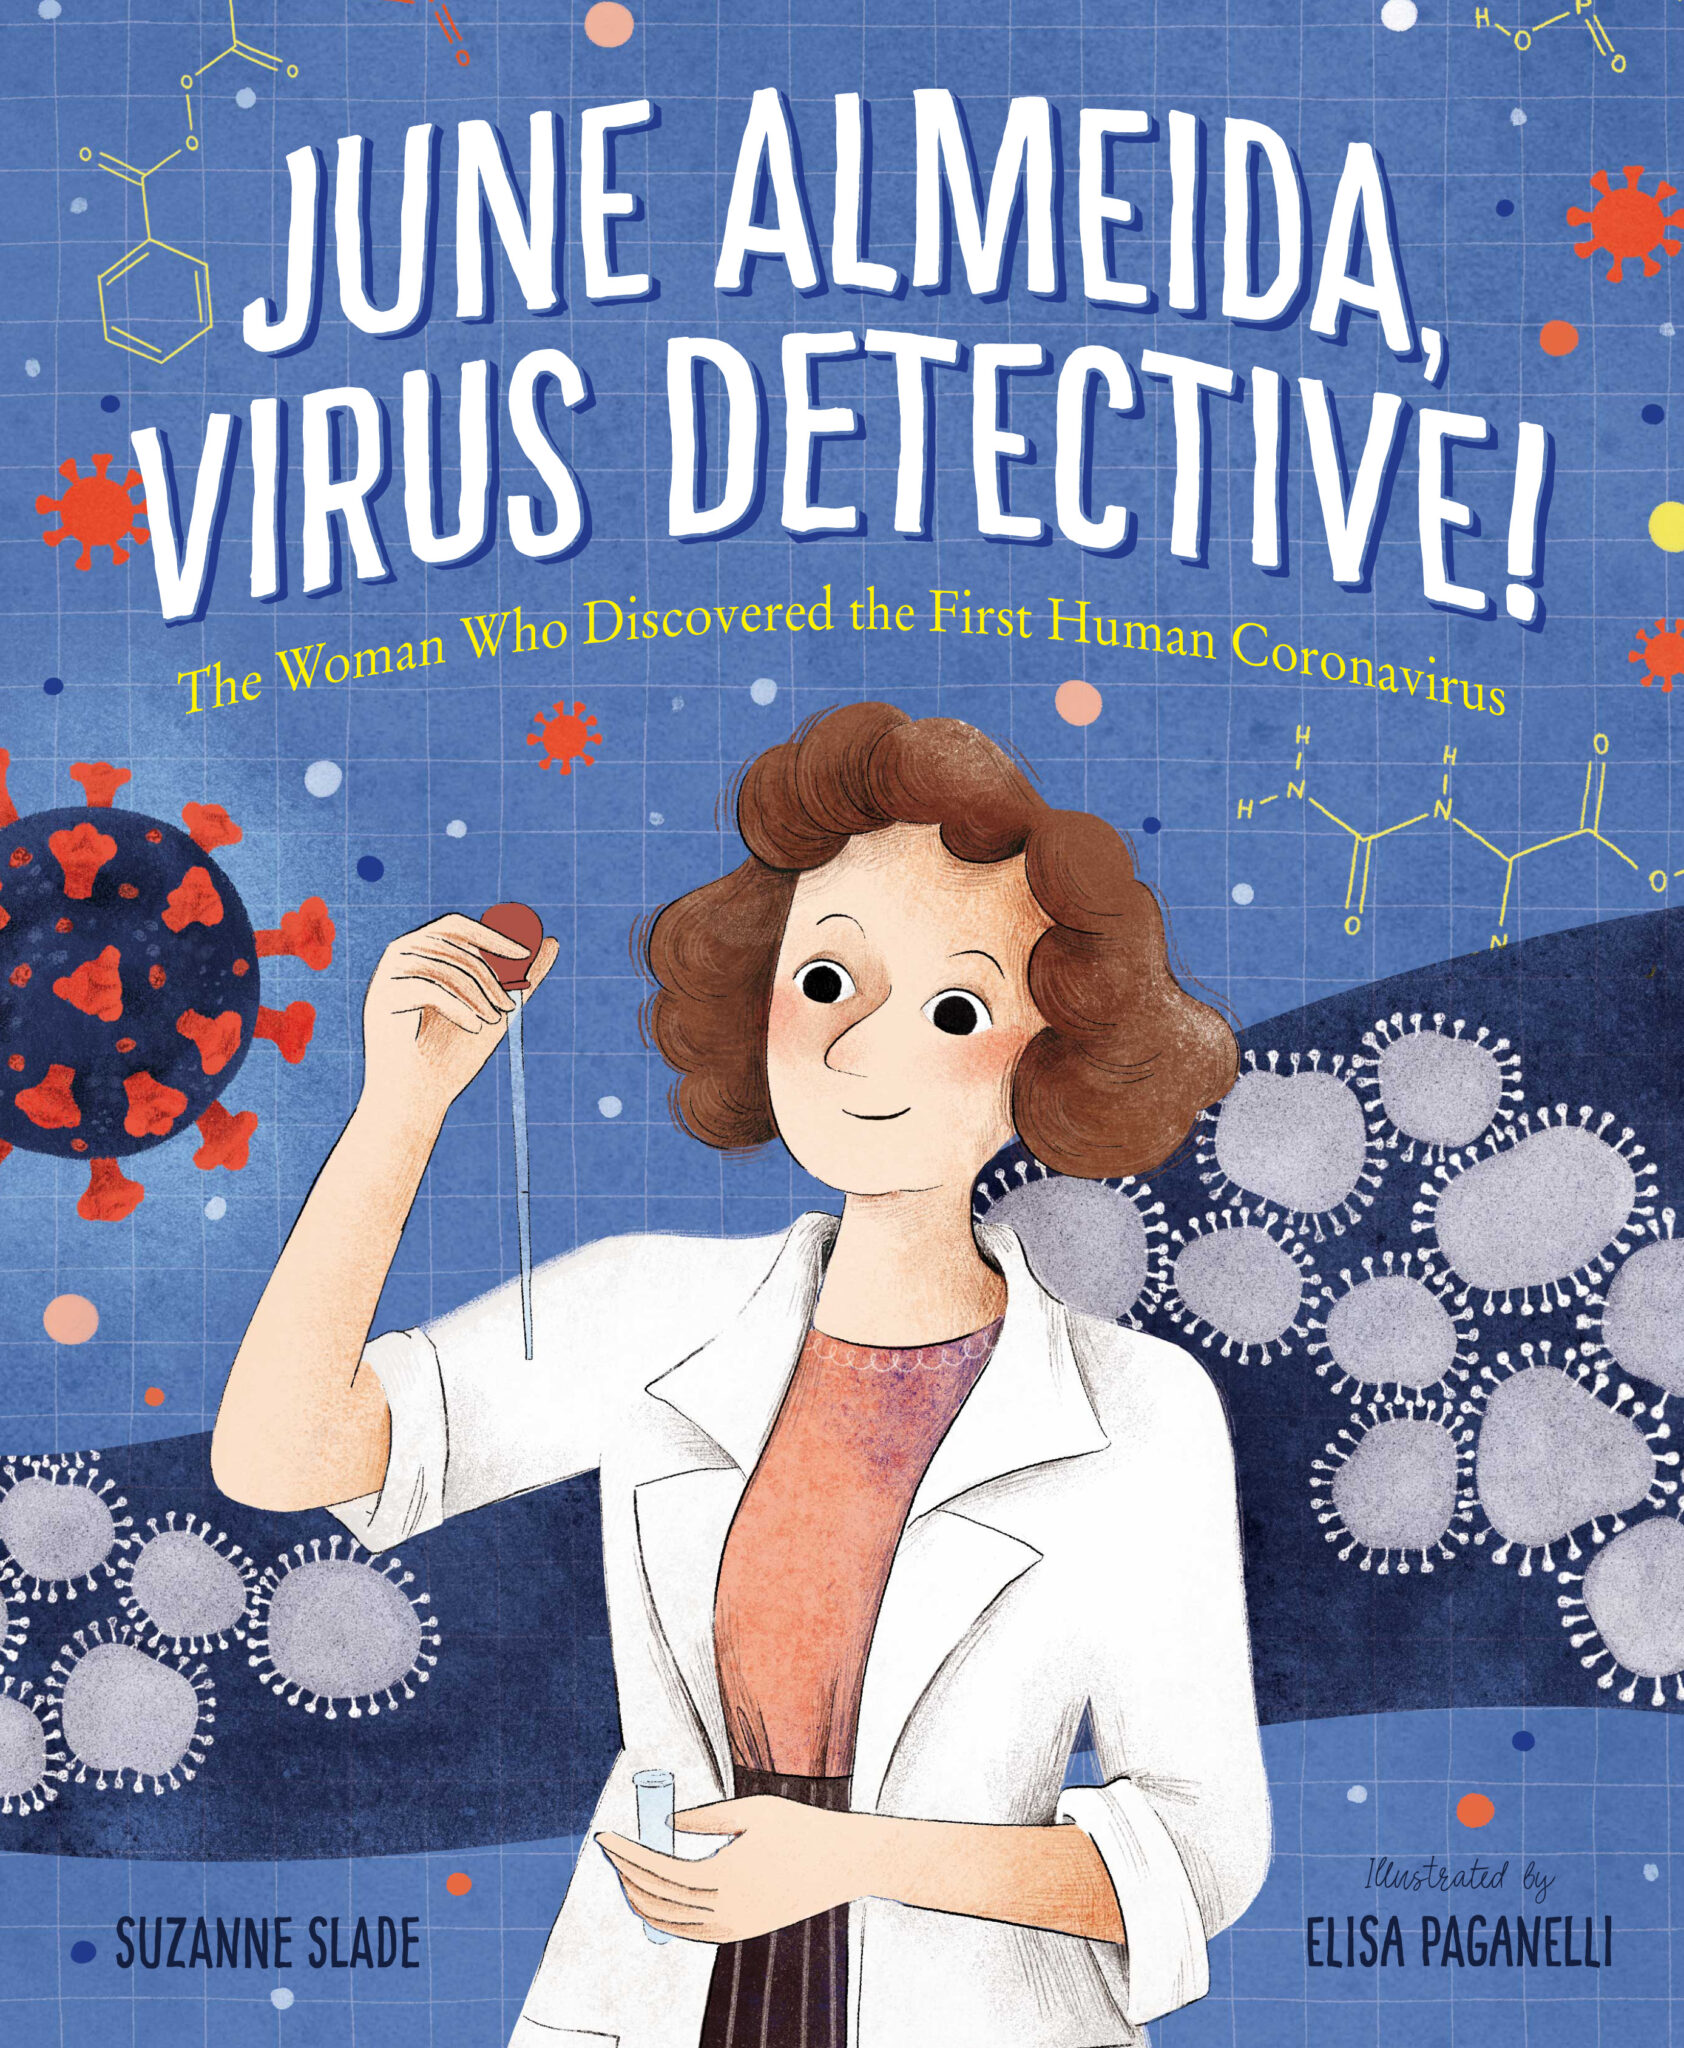 JUNE ALMEIDA, VIRUS DETECTIVE! The Woman Who Discovered the First Human Coronavirus (+GIVEAWAY)